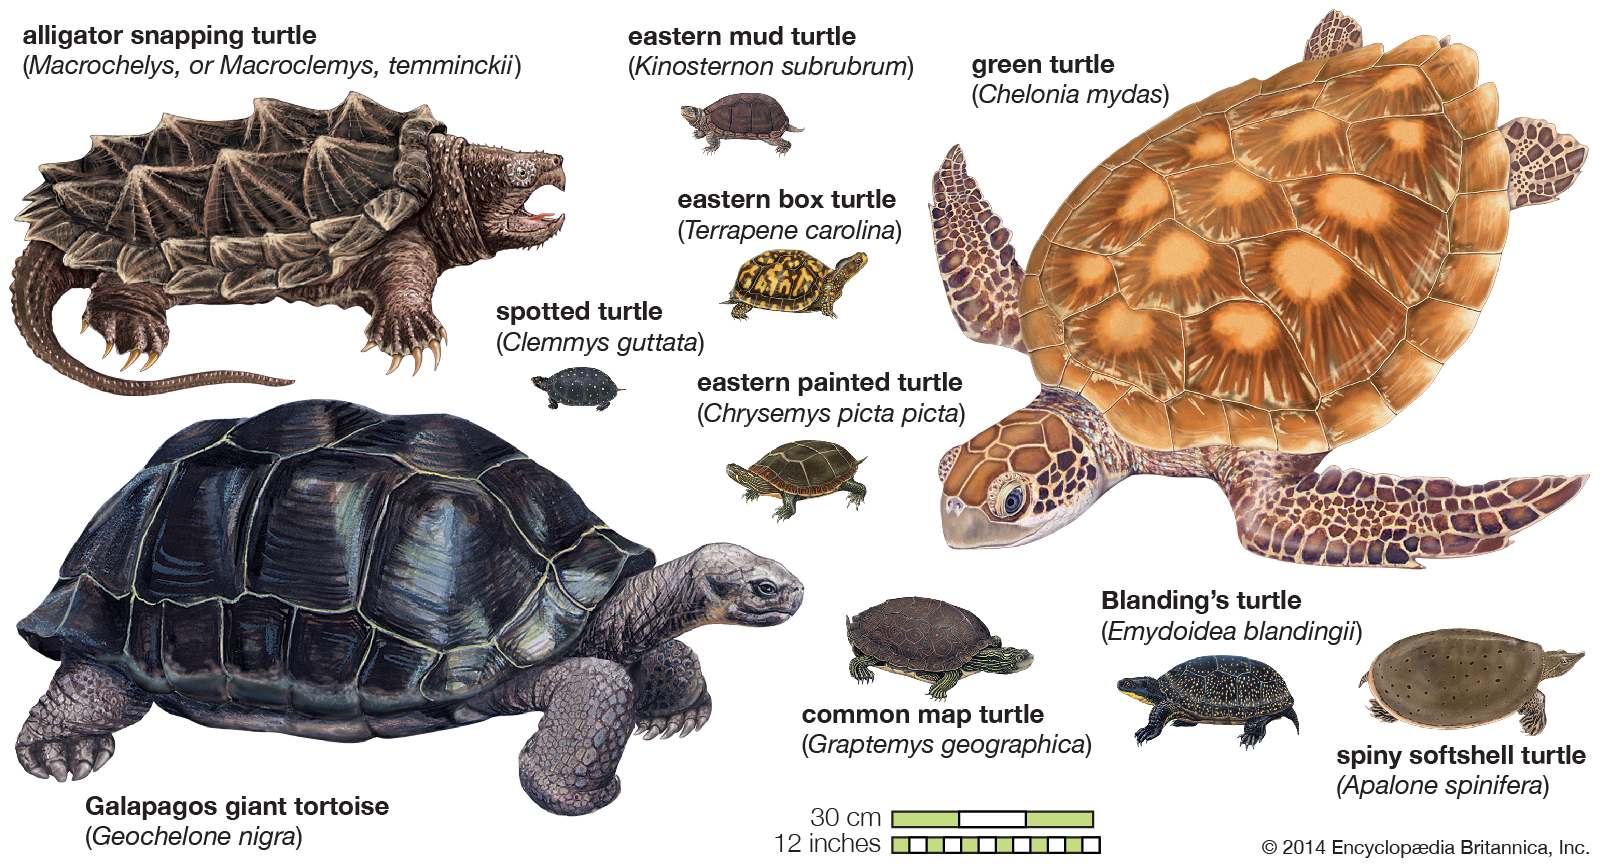 What is the most common type of turtle?